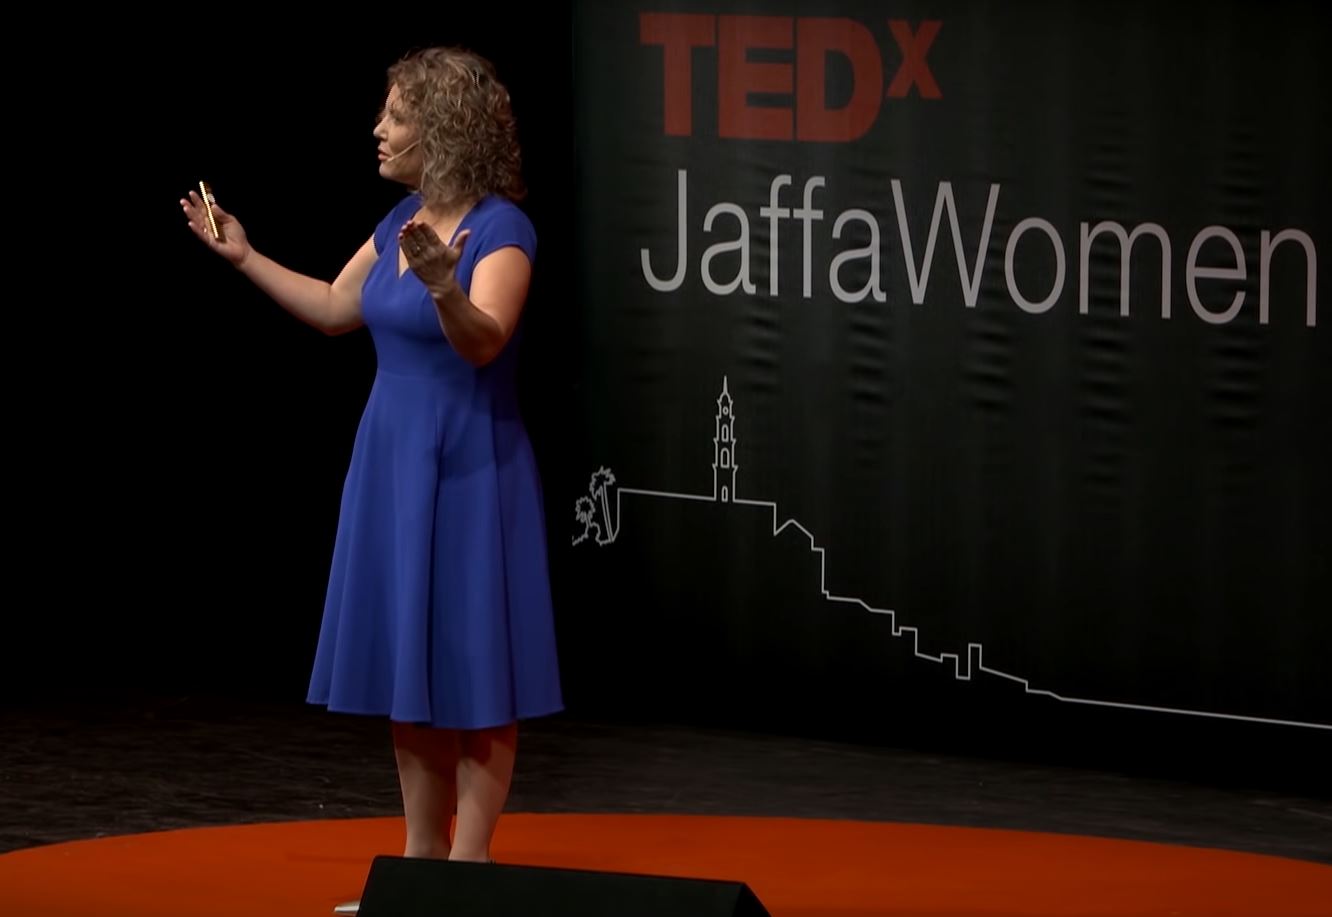 What Does Your Money Say About You? | Noga Levzion Nadan | TEDxJaffaWomen